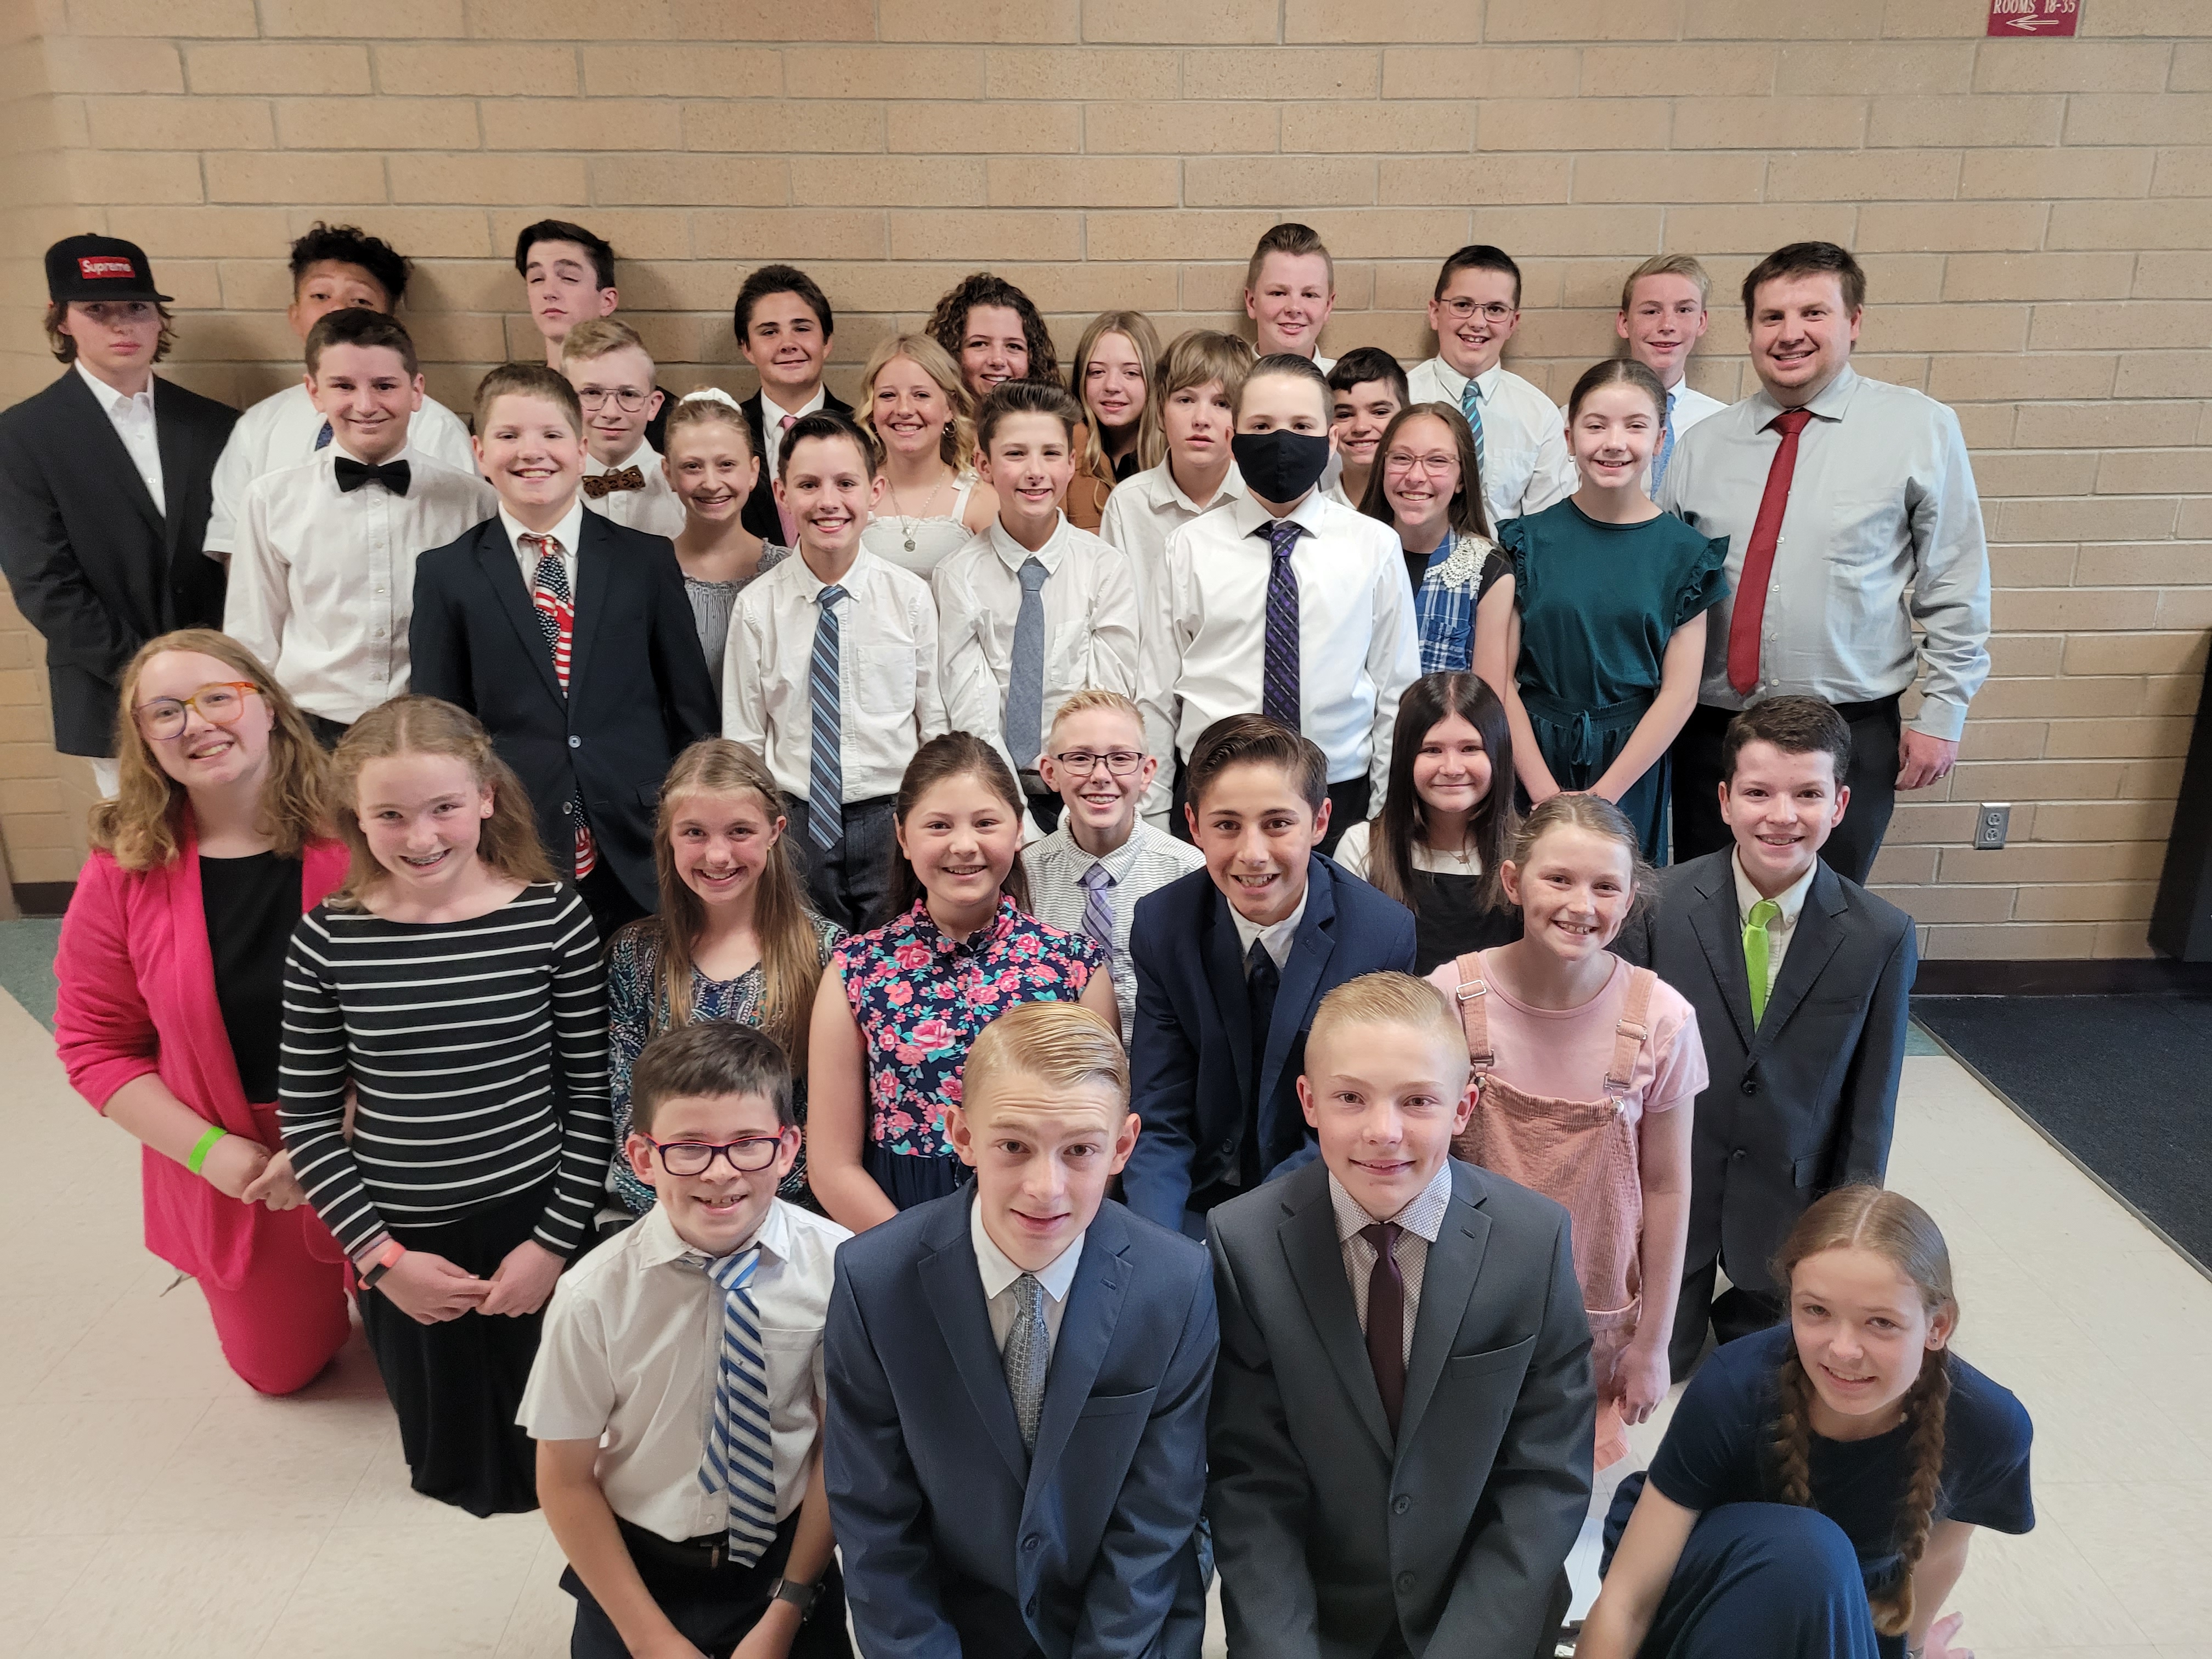 Pictures from the We the People competition at DFMS